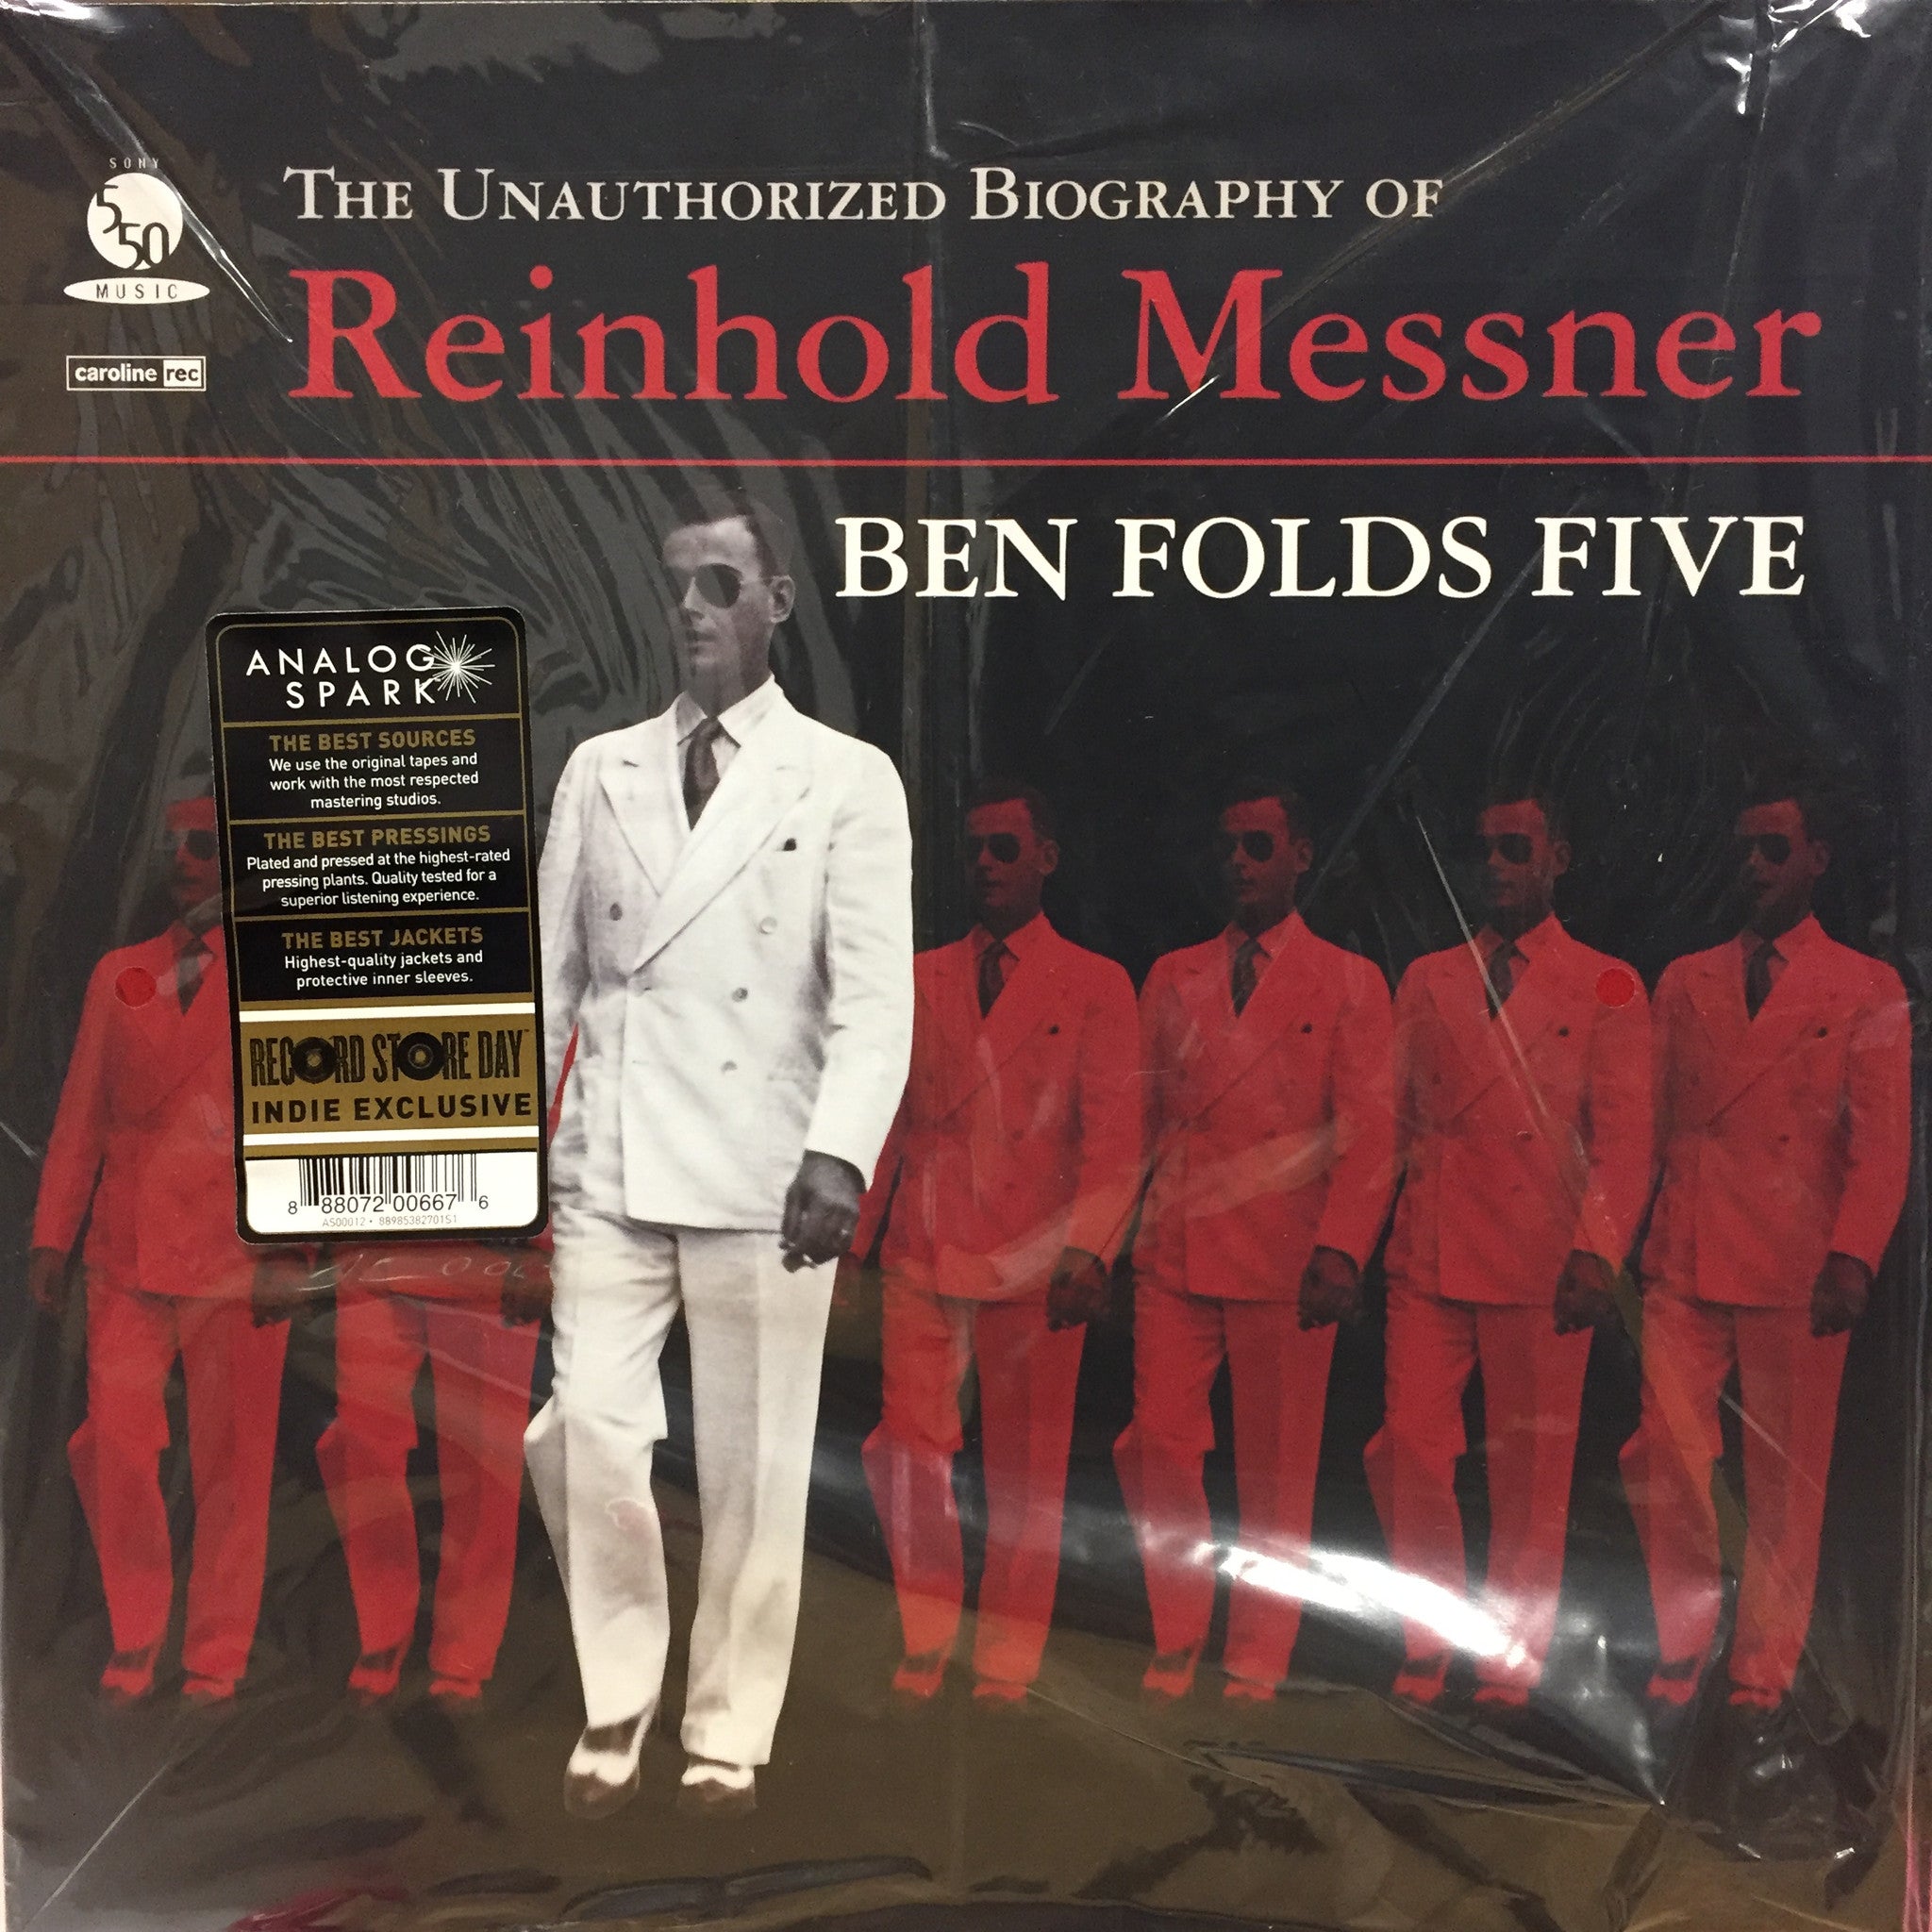 Ben Folds Five - Unauthorized Biography of Reinhold Messner - New Vinyl Record 2017 Concord Music Limited Edition Gatefold 180gram Opaque Red Vinyl Reissue (LTD to 500) - Power Pop / Alt-Rock